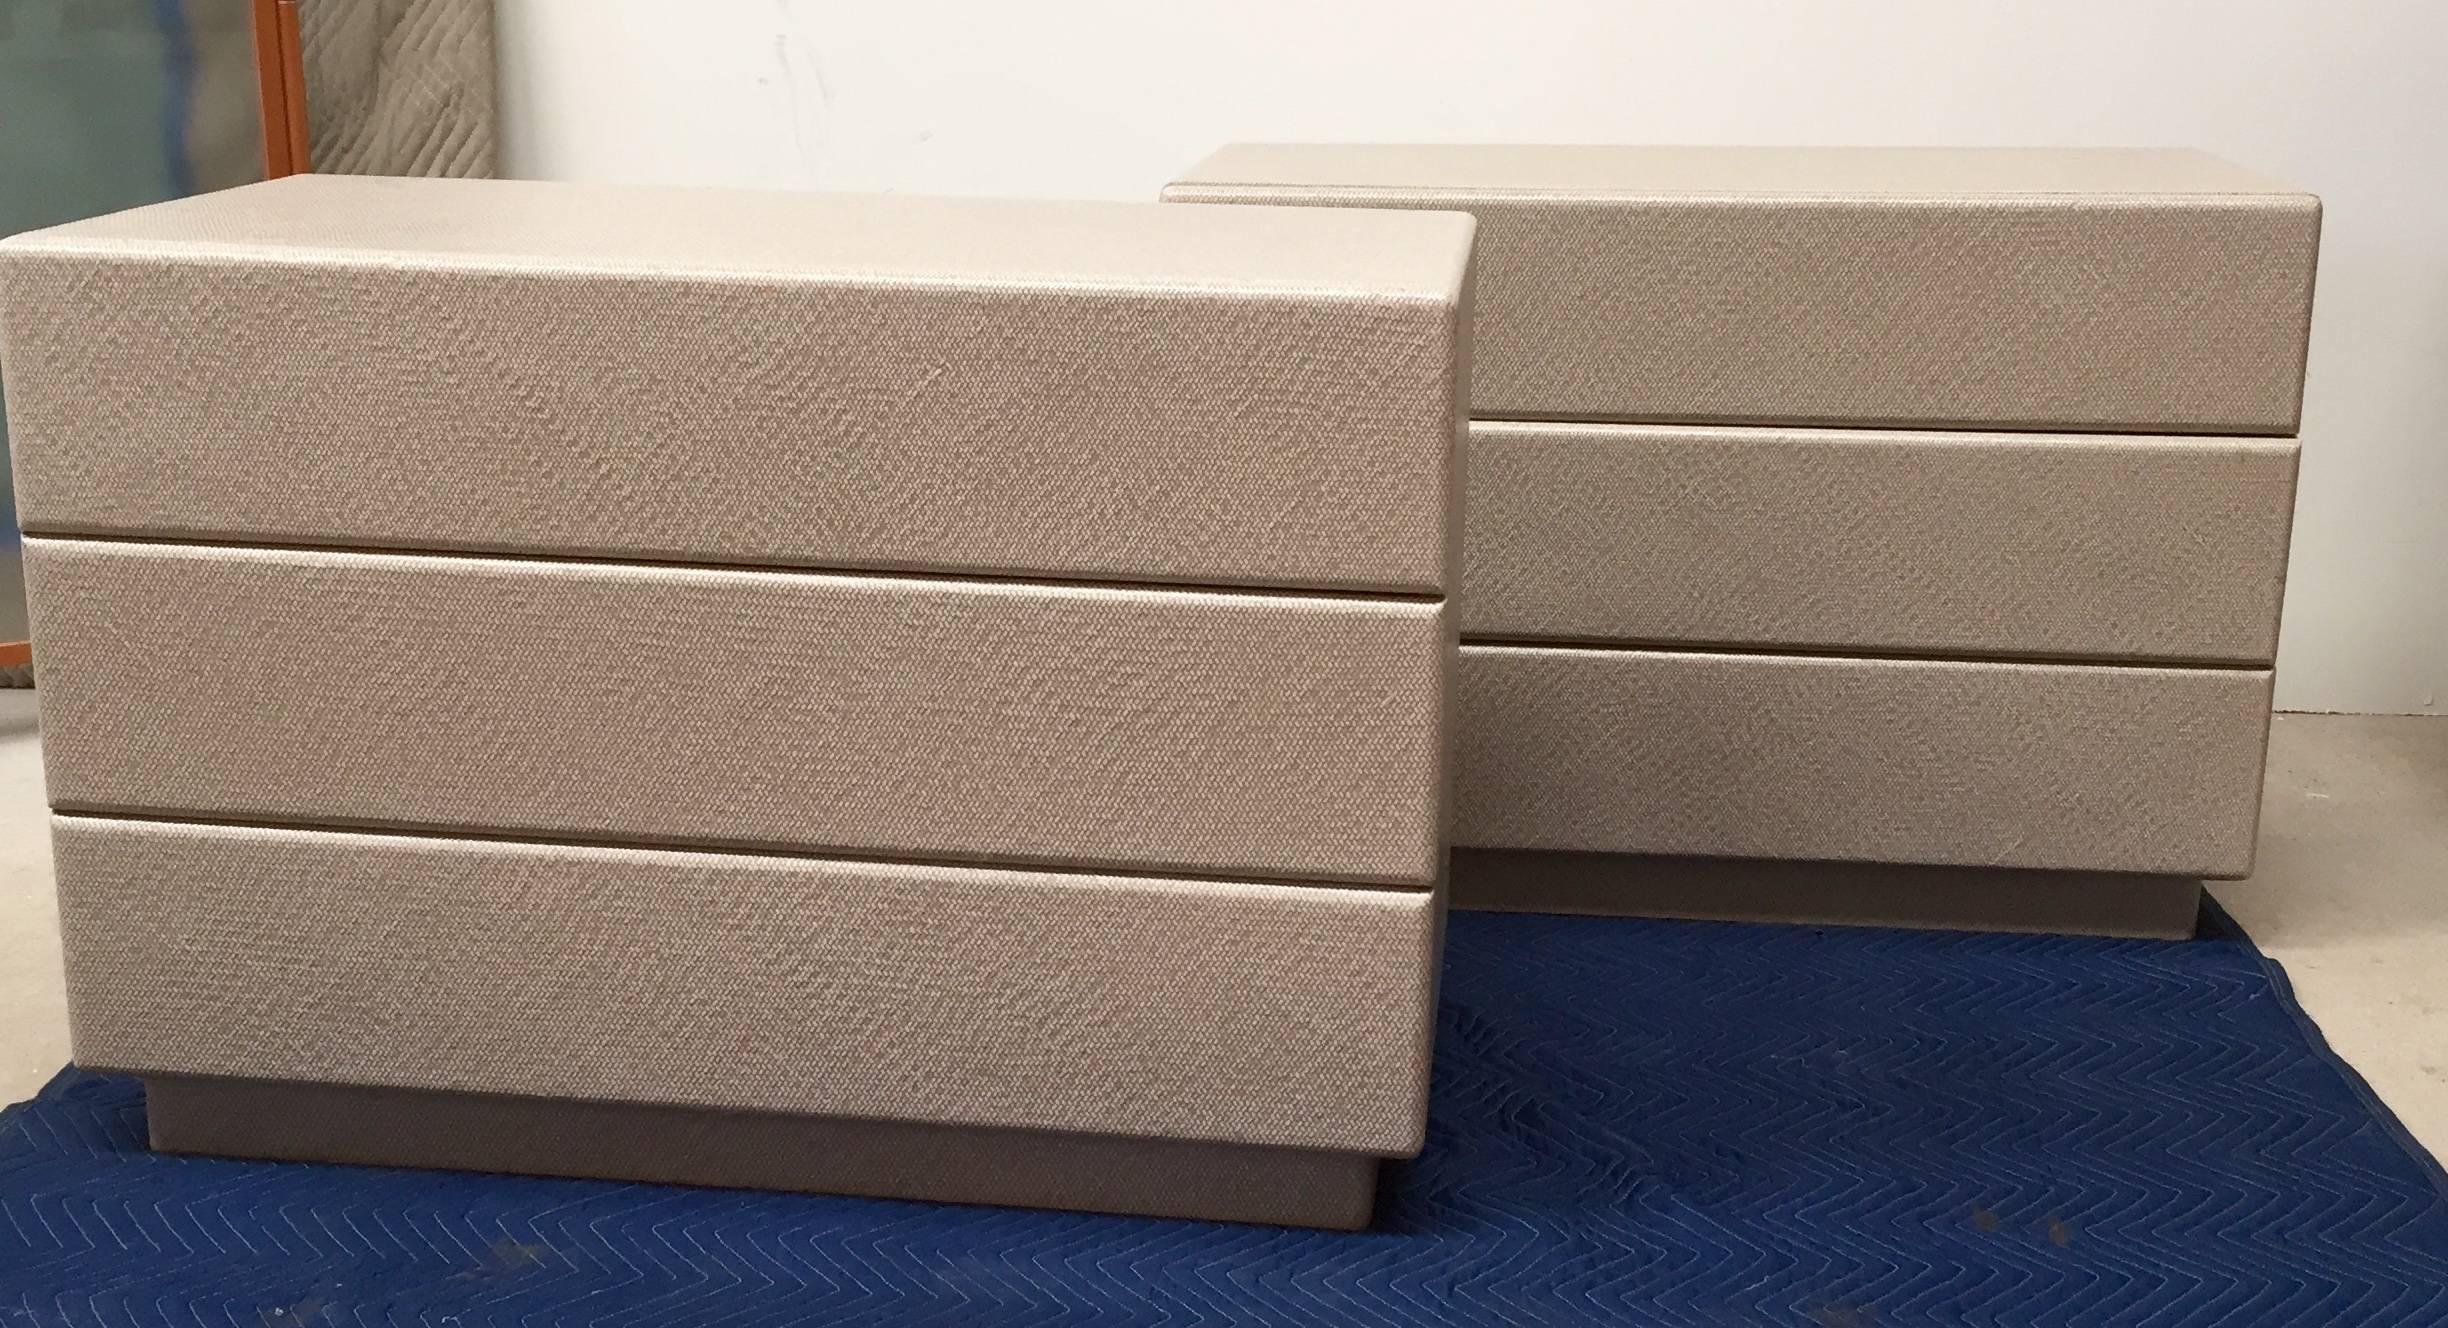 With their modernist, clean design, these chests are in the style of Karl Springer. They are clad in a taupe textured linen and rest on a recessed plinth base.